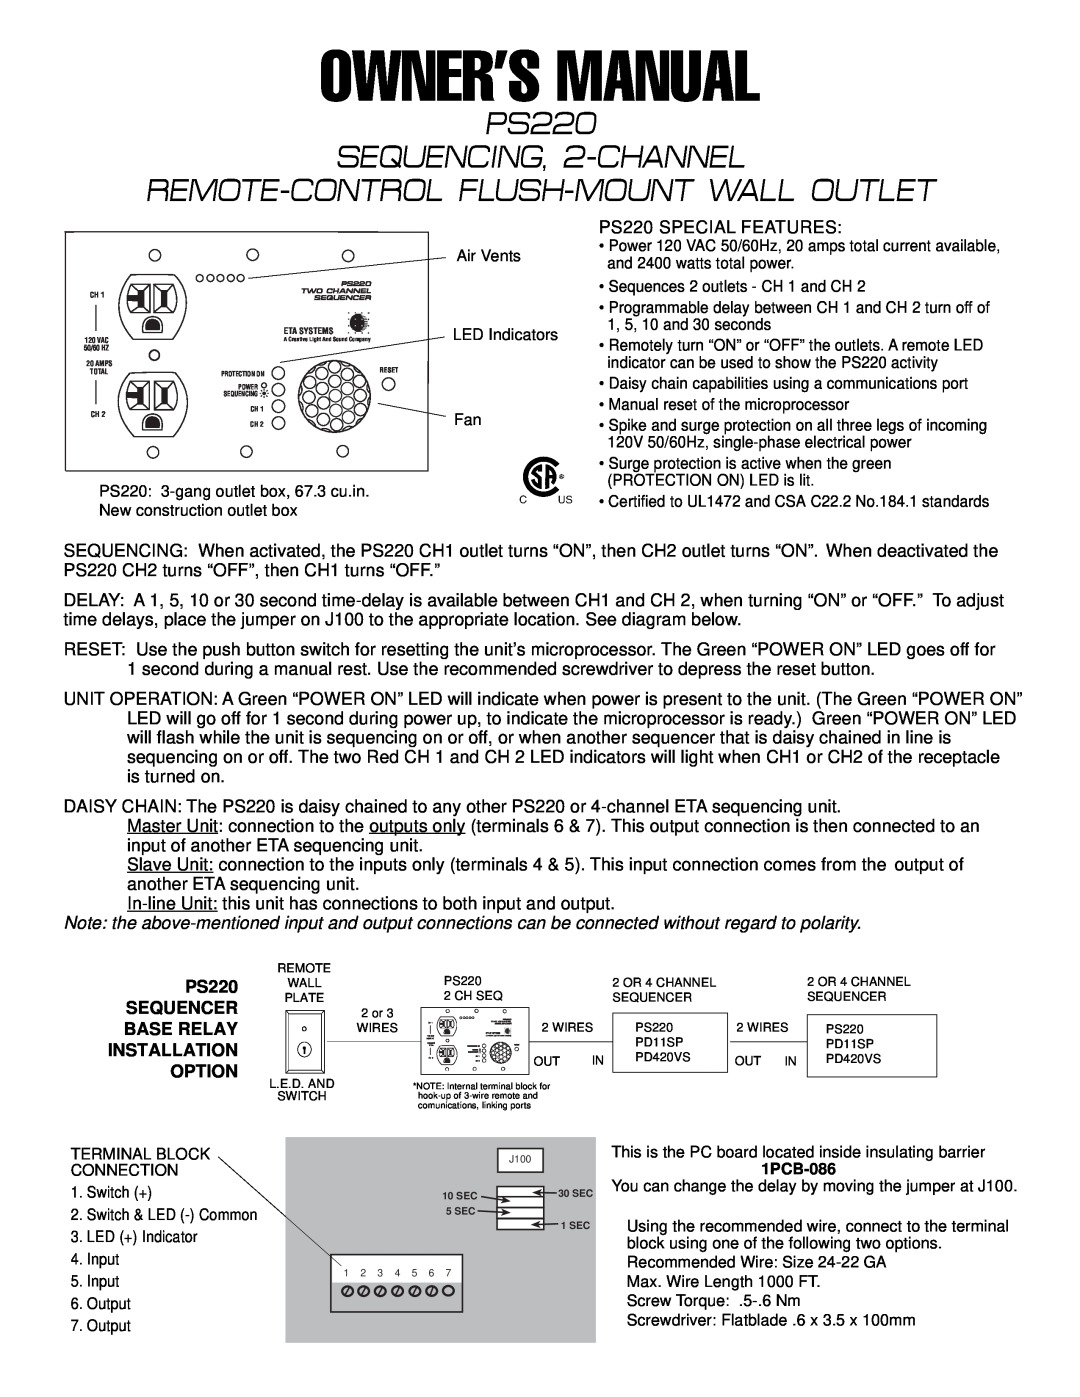 ETA Systems owner manual PS220 SEQUENCING, 2-CHANNEL REMOTE-CONTROL FLUSH-MOUNT WALL OUTLET 